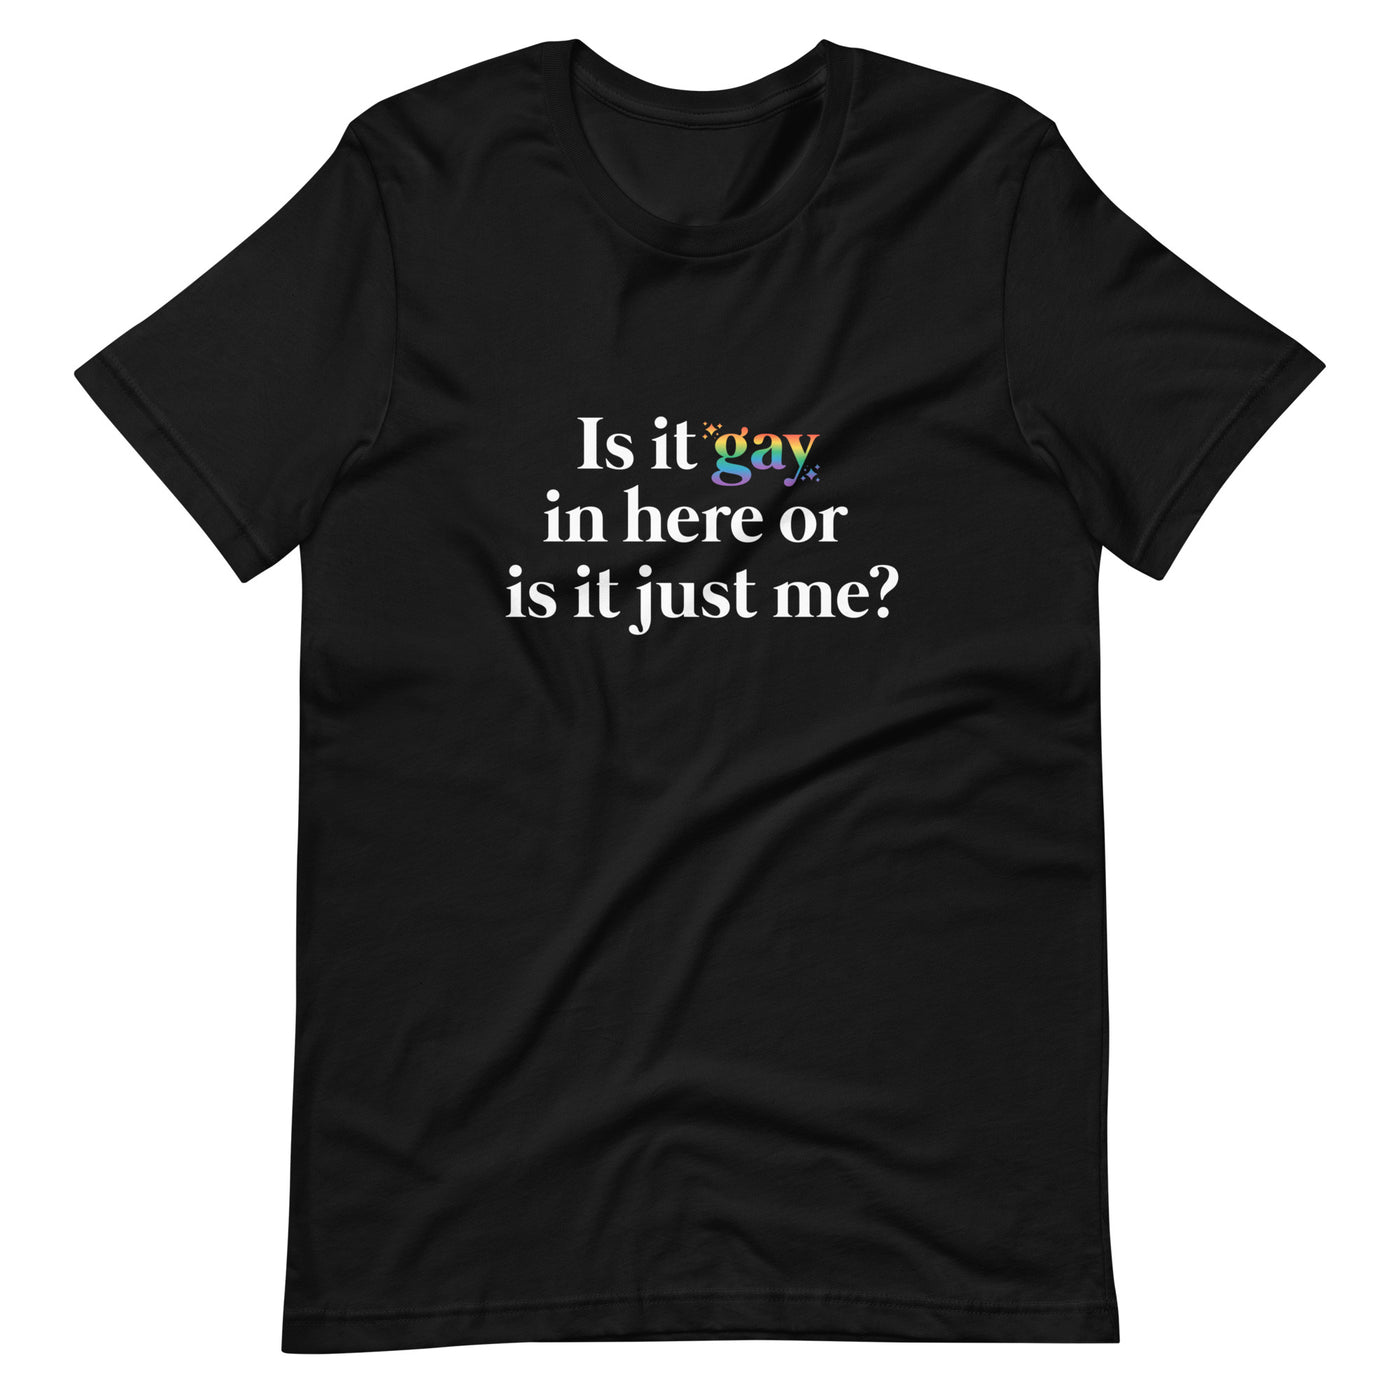 Pride Clothes - Clear the Air and Let It Be Clear Pride Attire T-Shirt - Black